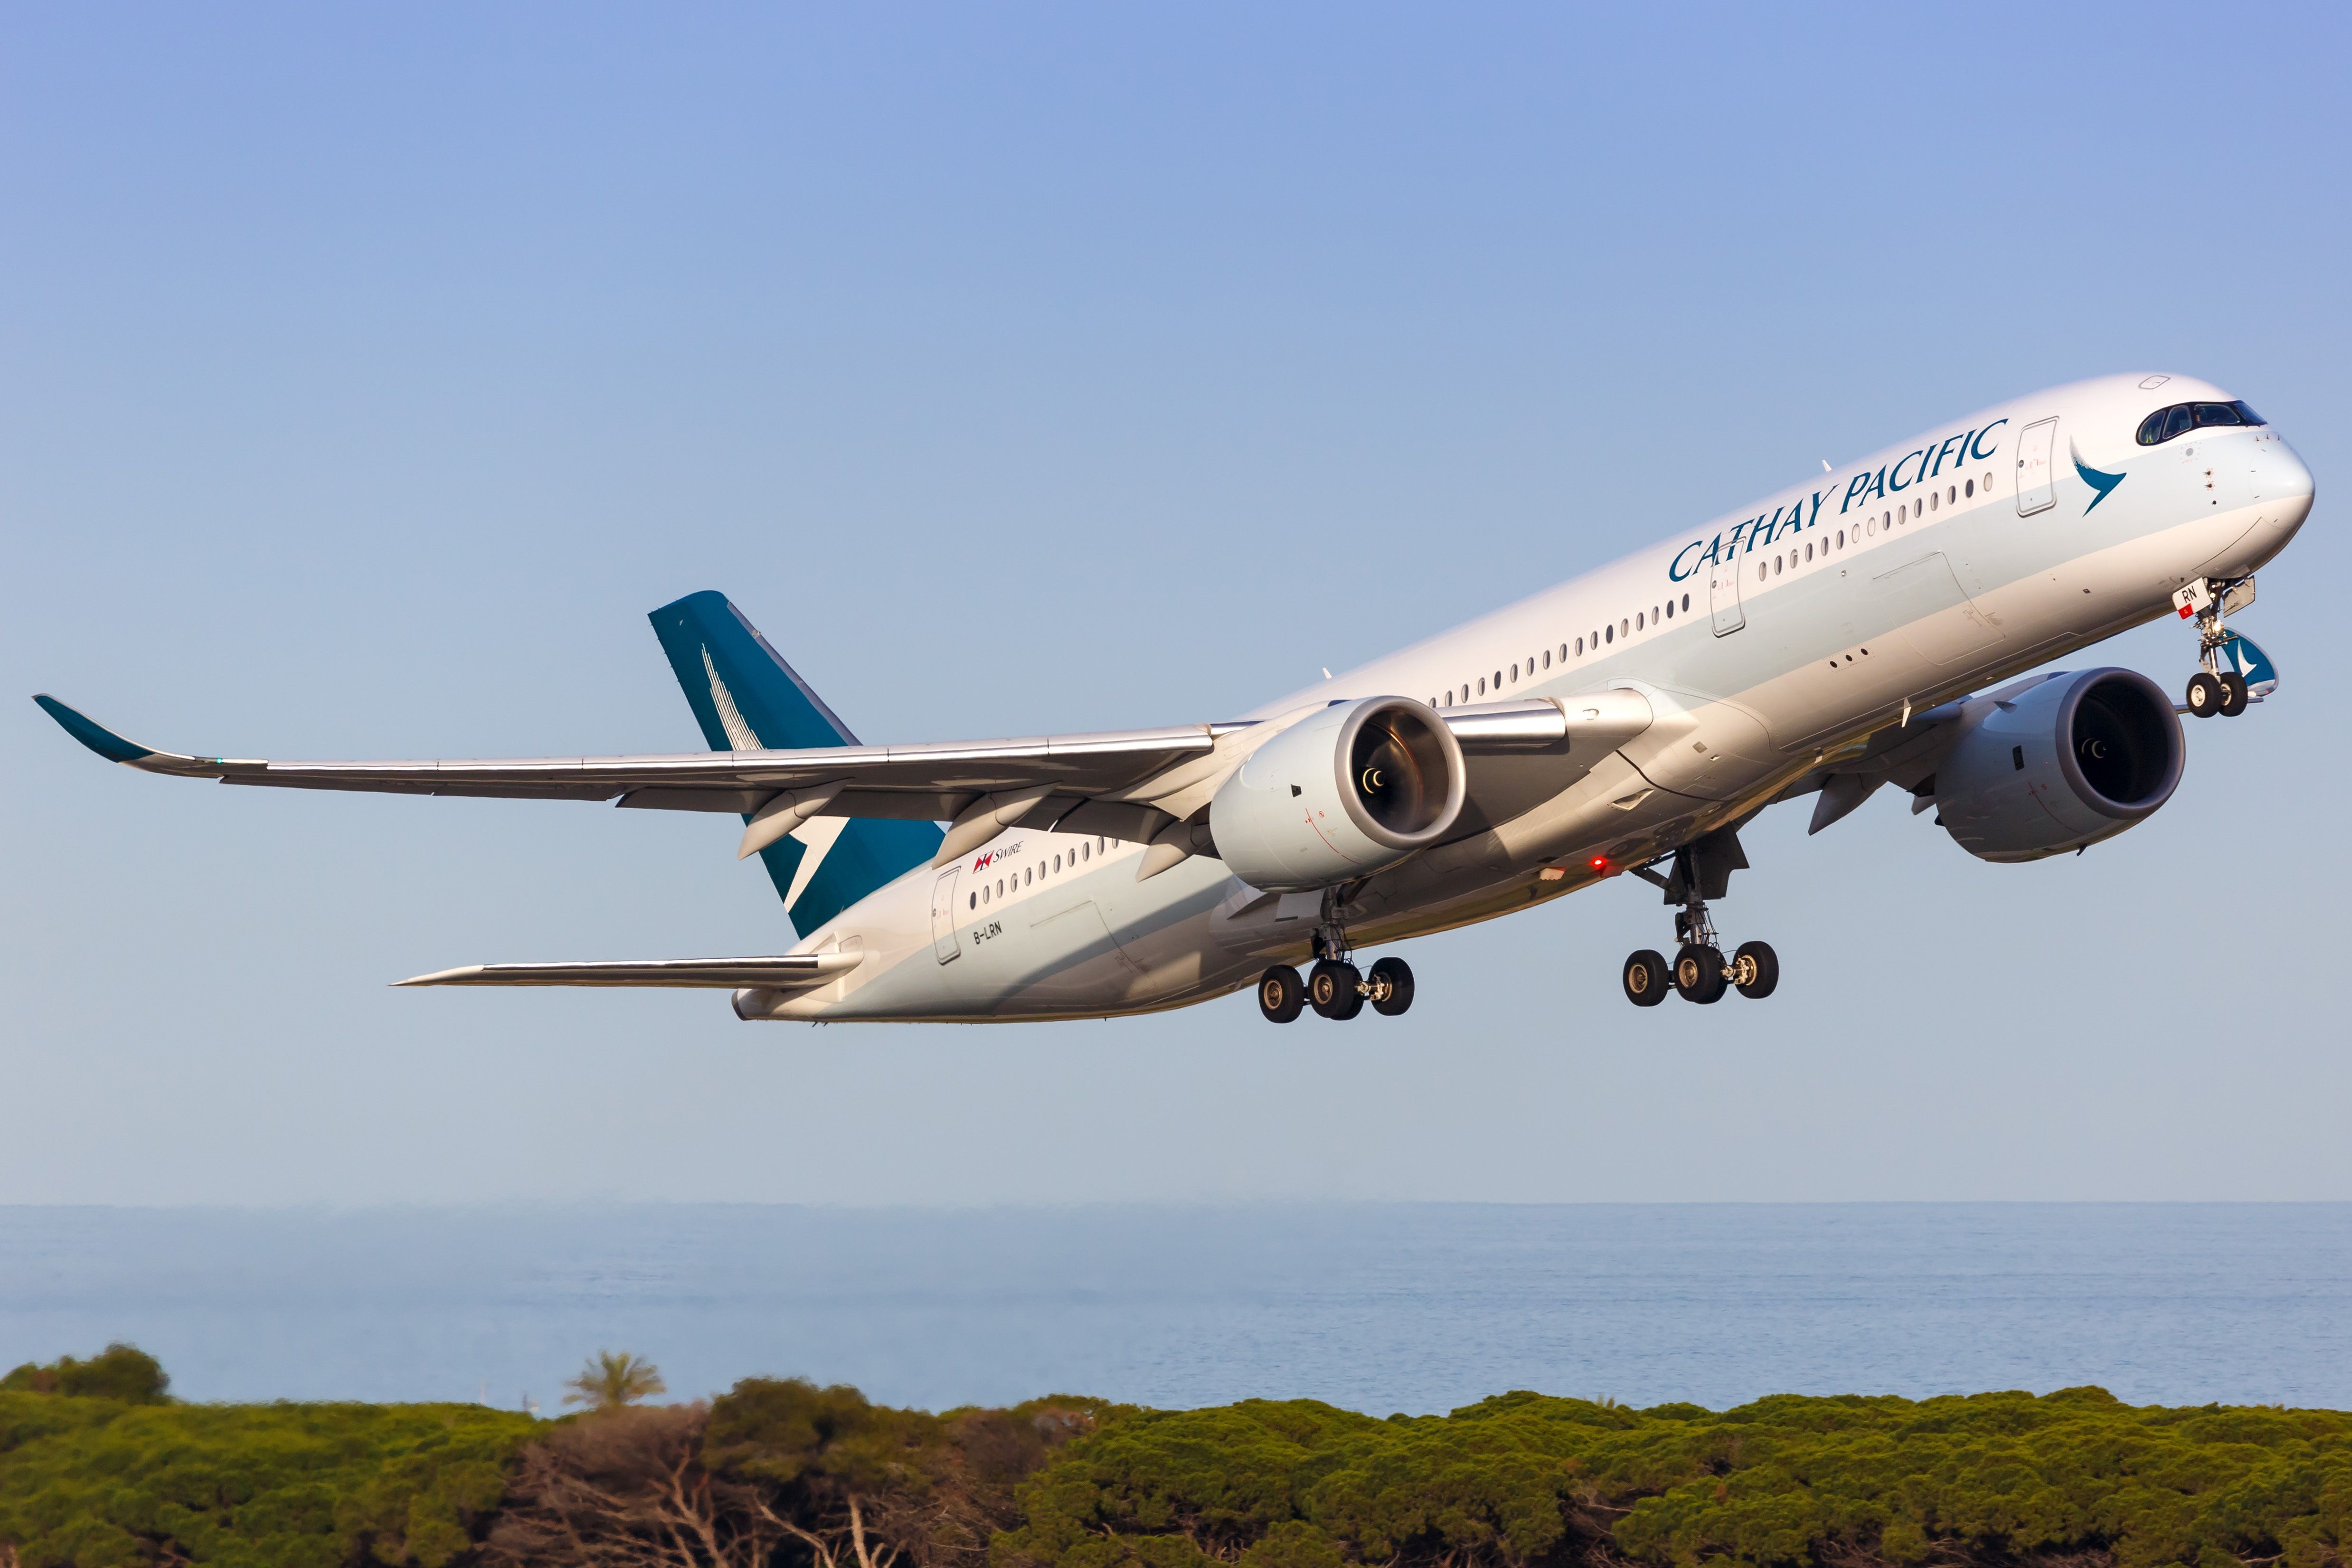 A Cathay Pacific A350 taking off.